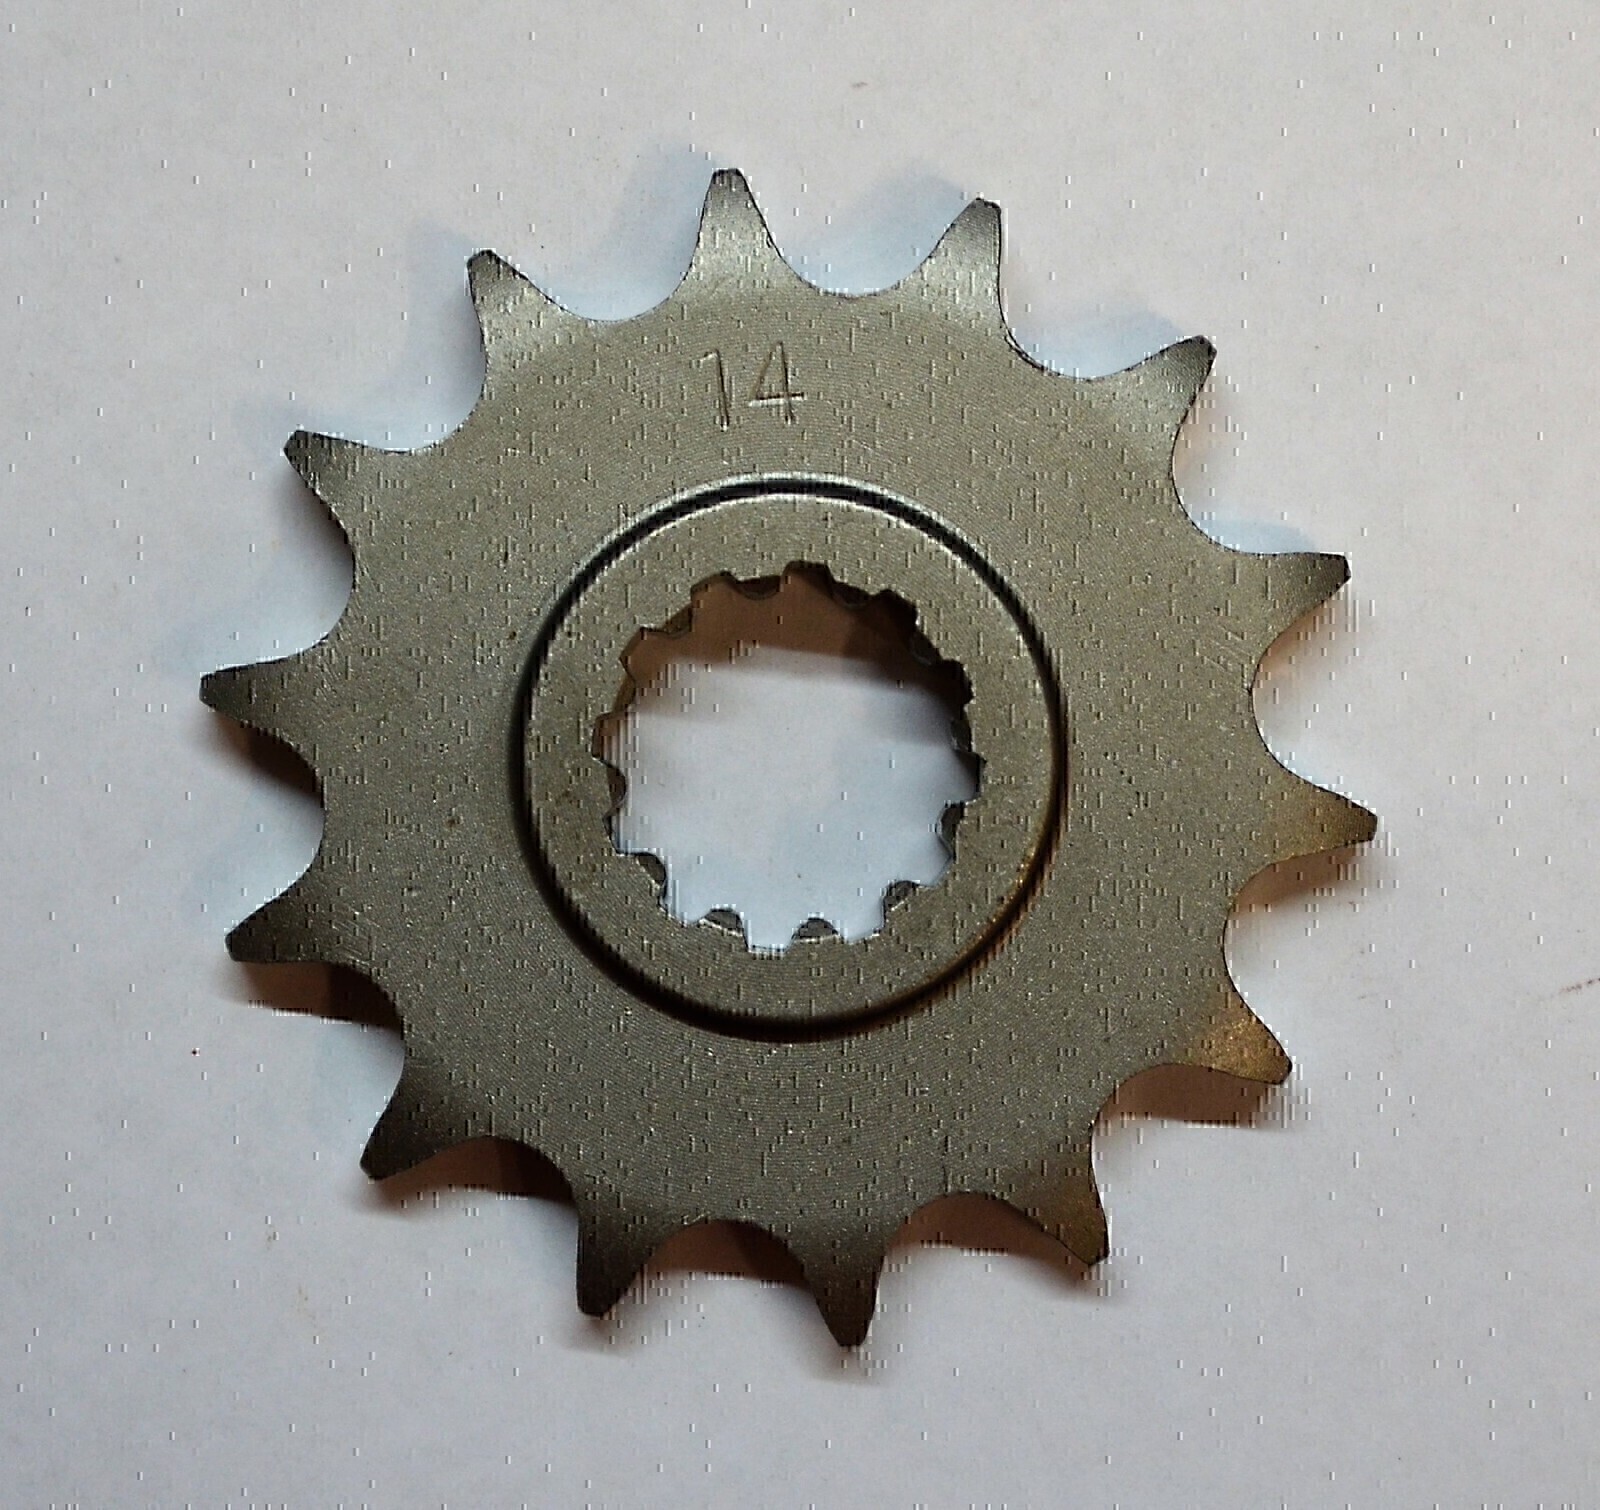 15 TOOTH FRONT SPROCKET FOR HONDA CR80 CR85 1986 - 2007